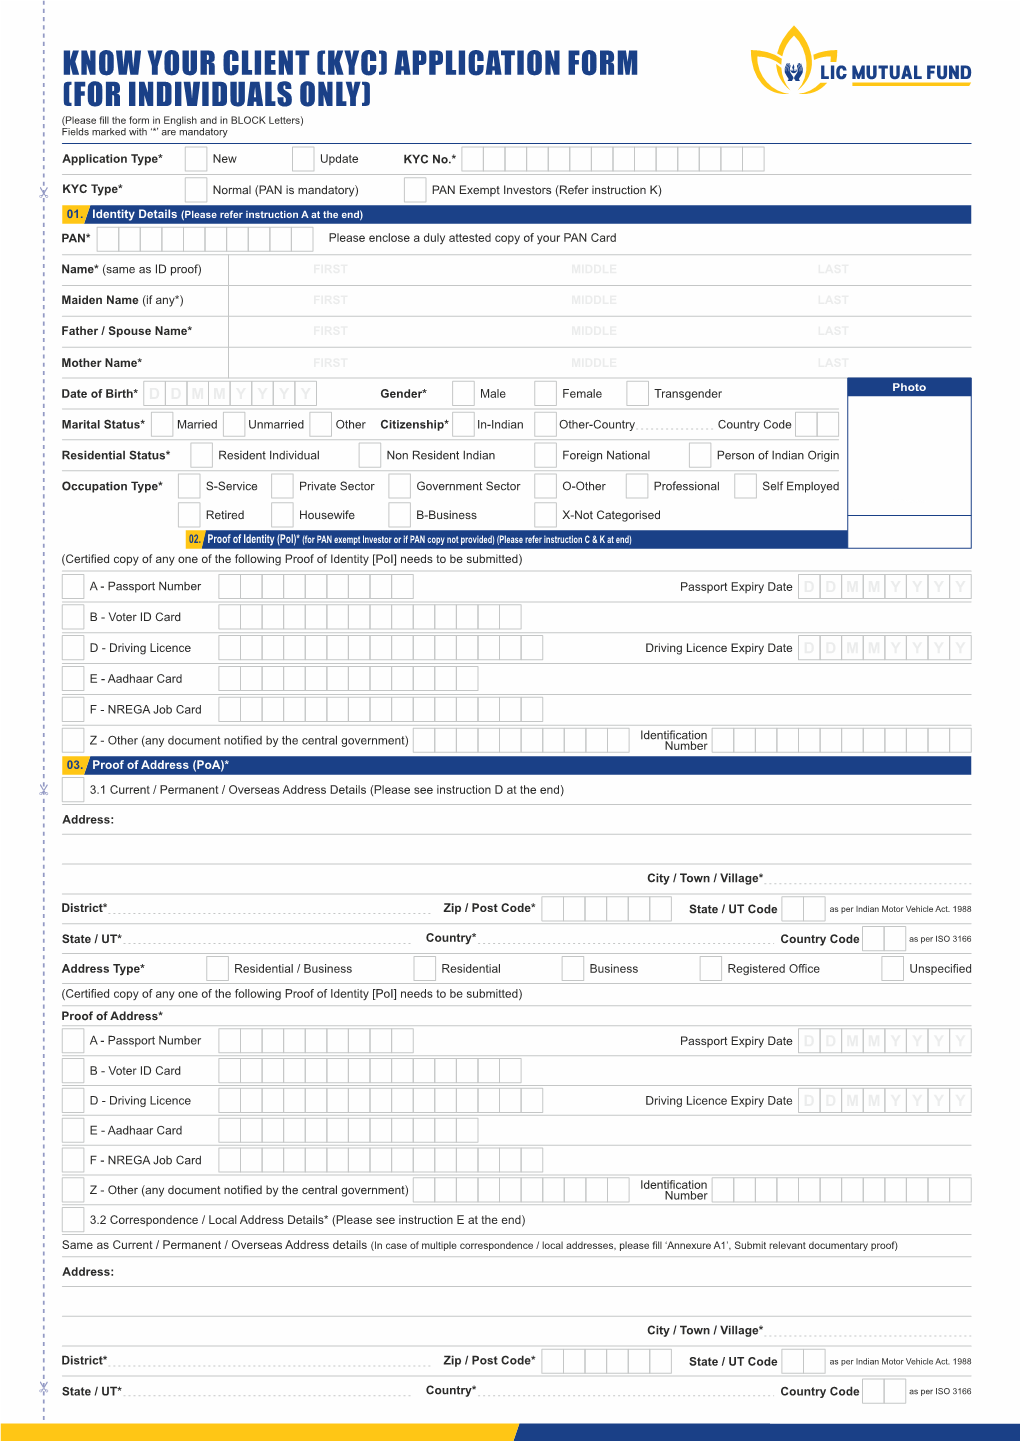 LIC MF Equity Form Book March 20 for Website.Cdr